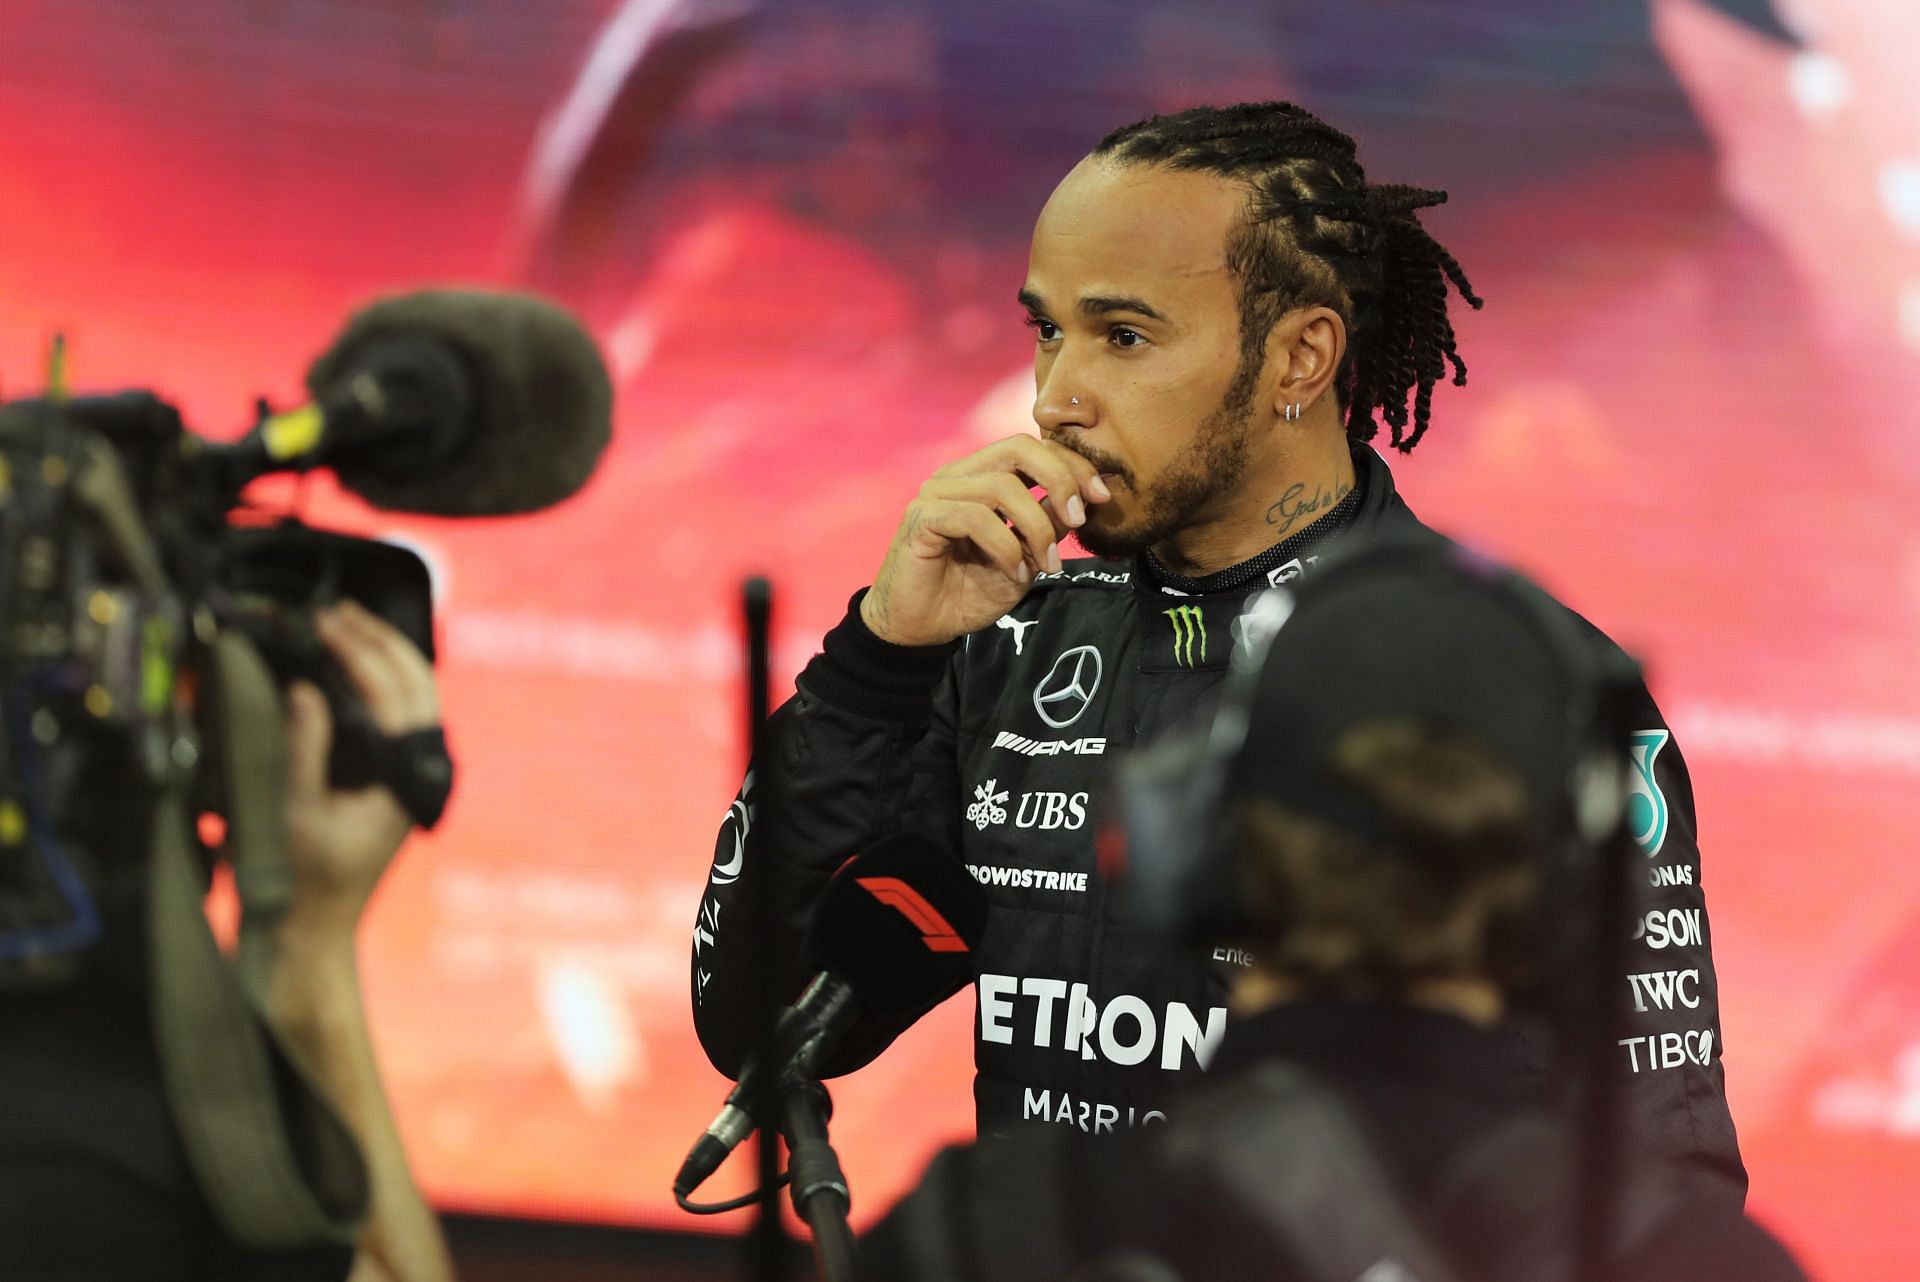 Lewis Hamilton during his last public interview after the 2021 Abu Dhabi Grand Prix (Photo by Kamran Jebreili - Pool/Getty Images)